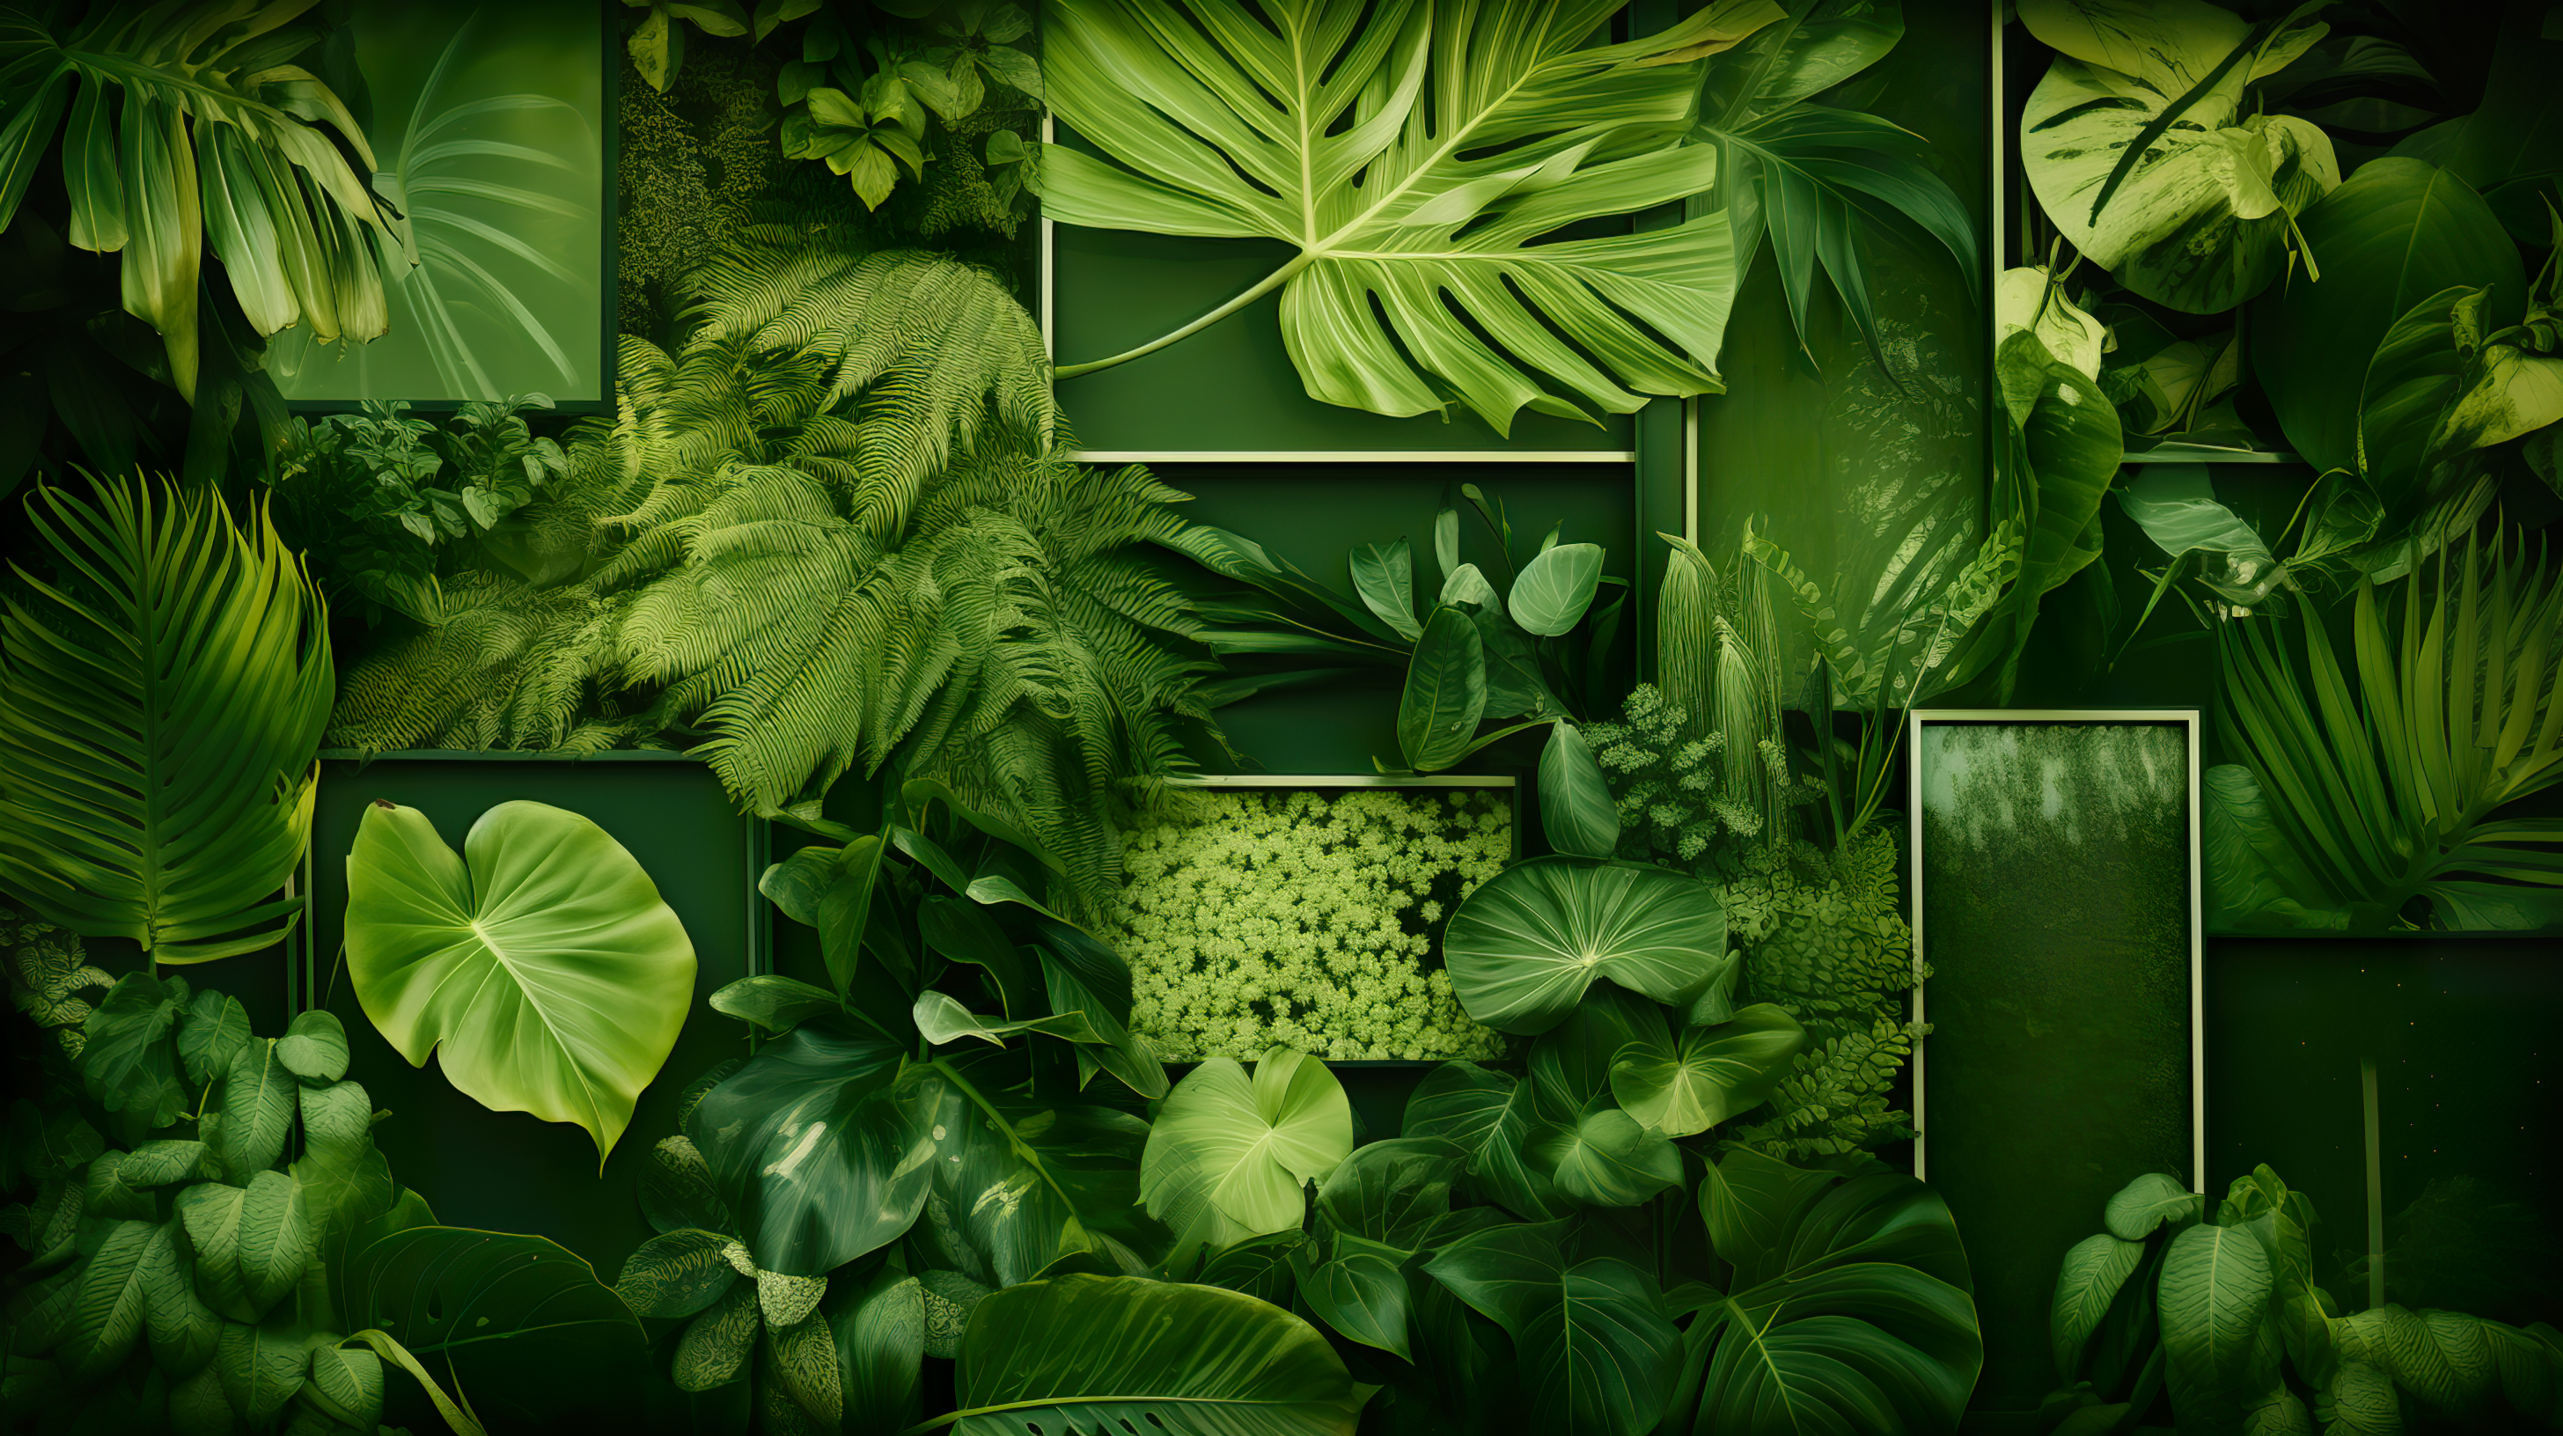 HD desktop wallpaper featuring a lush green aesthetic with various tropical leaves, perfect for a serene background.